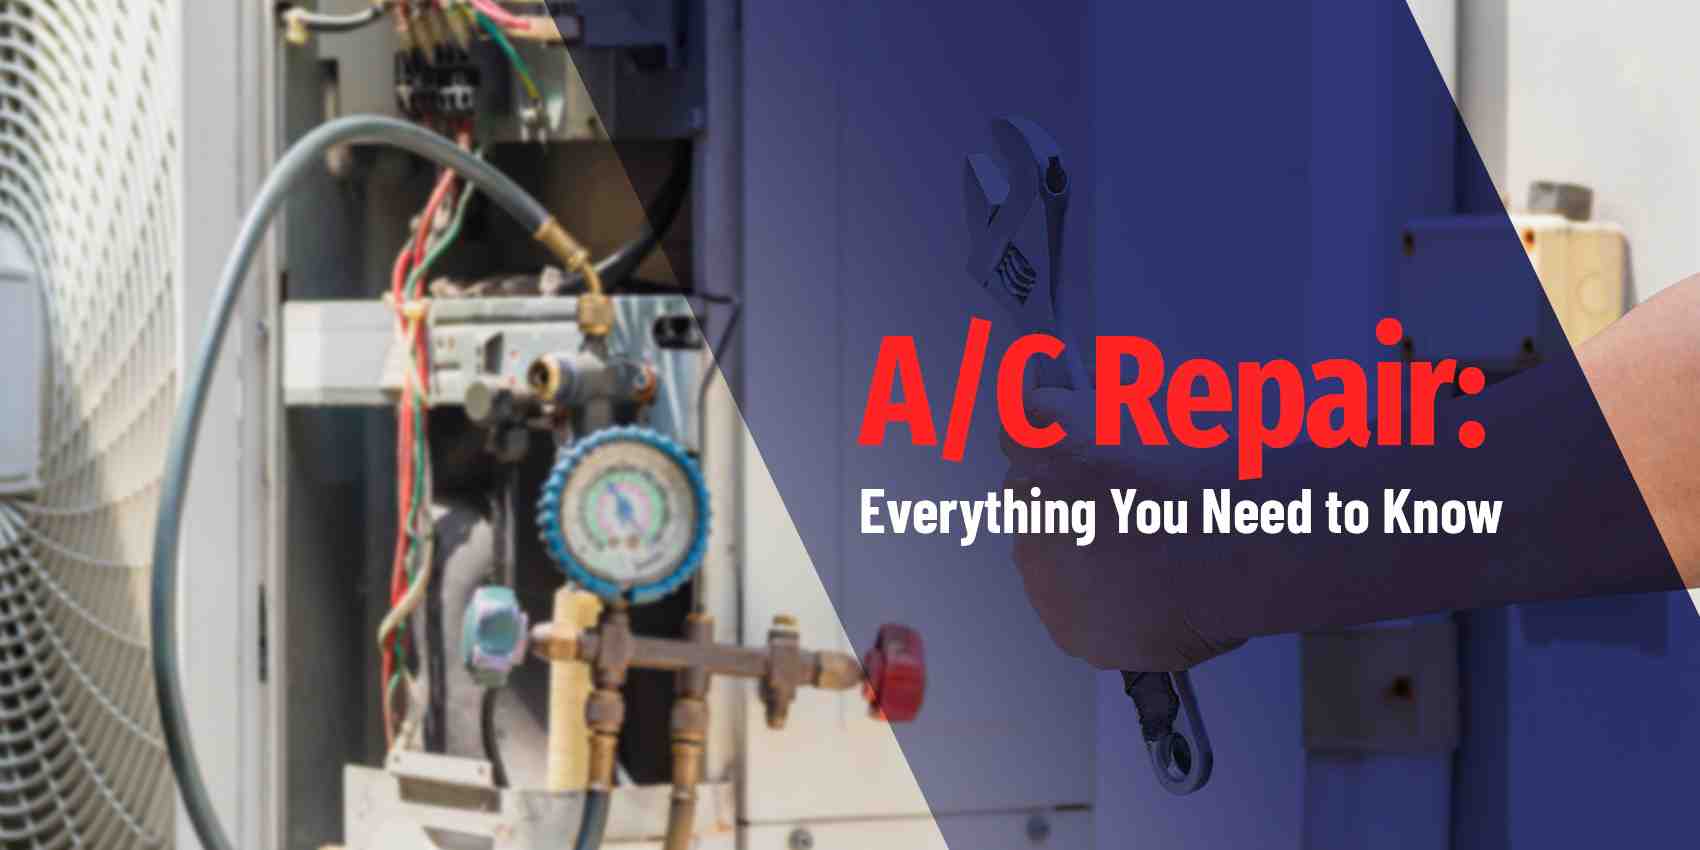 A/C Repair: Everything You Need to Know - C&S Air